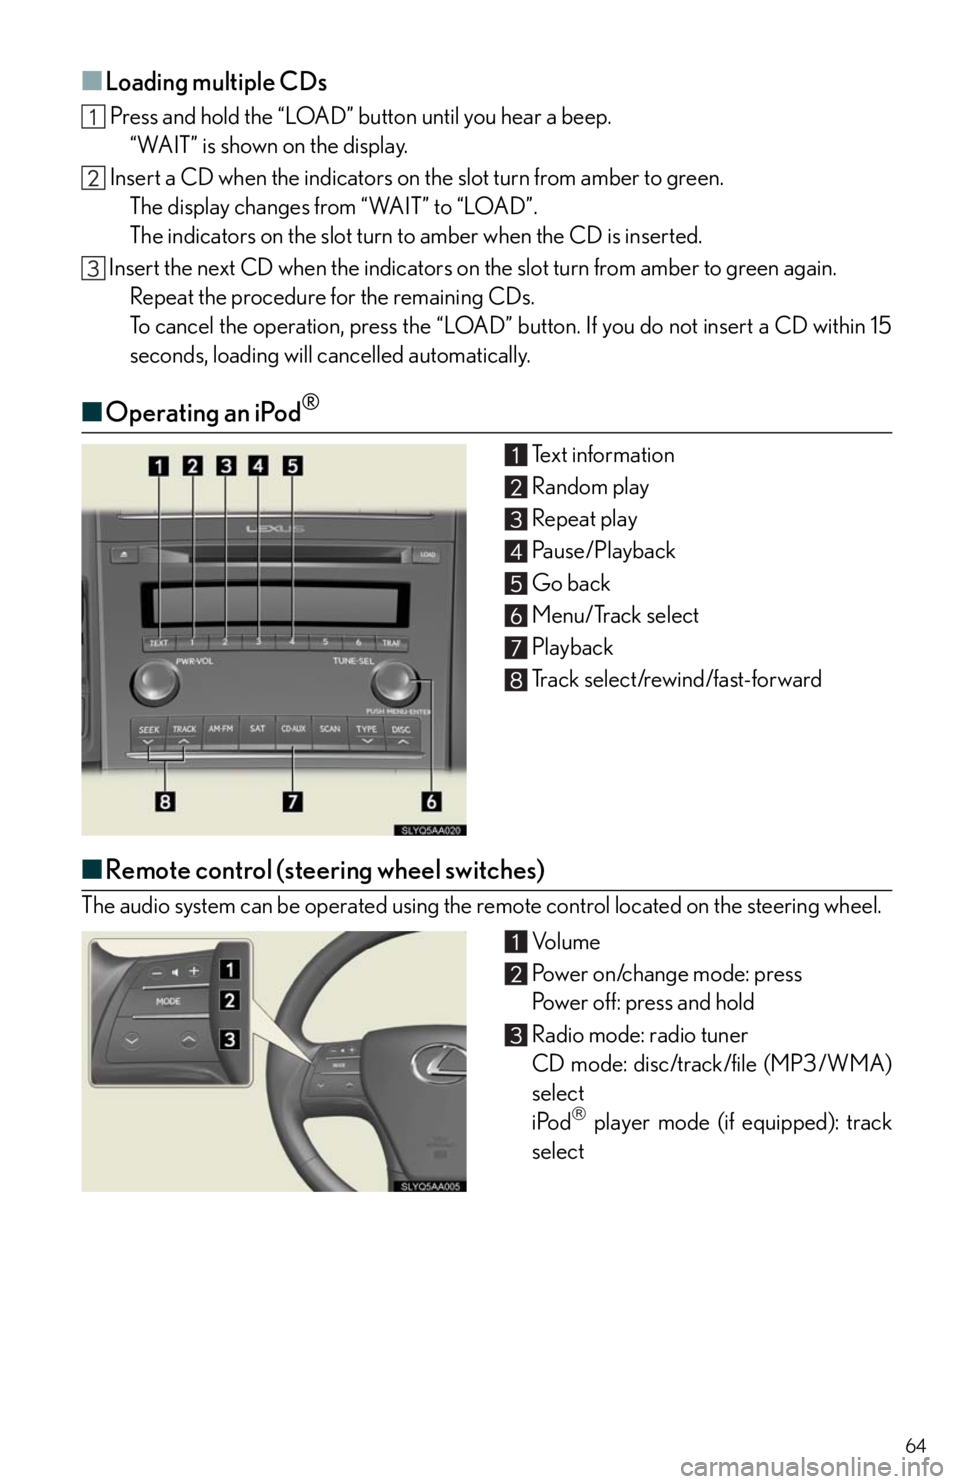 Lexus HS250h 2010  Setup / LEXUS 2010 HS250H QUICK GUIDE OWNERS MANUAL (OM75023U) 64
■Loading multiple CDs
 Press and hold the “LOAD” button until you hear a beep.
“WAIT” is shown on the display.
 Insert a CD when the indicators on the slot turn from amber to green.
The d